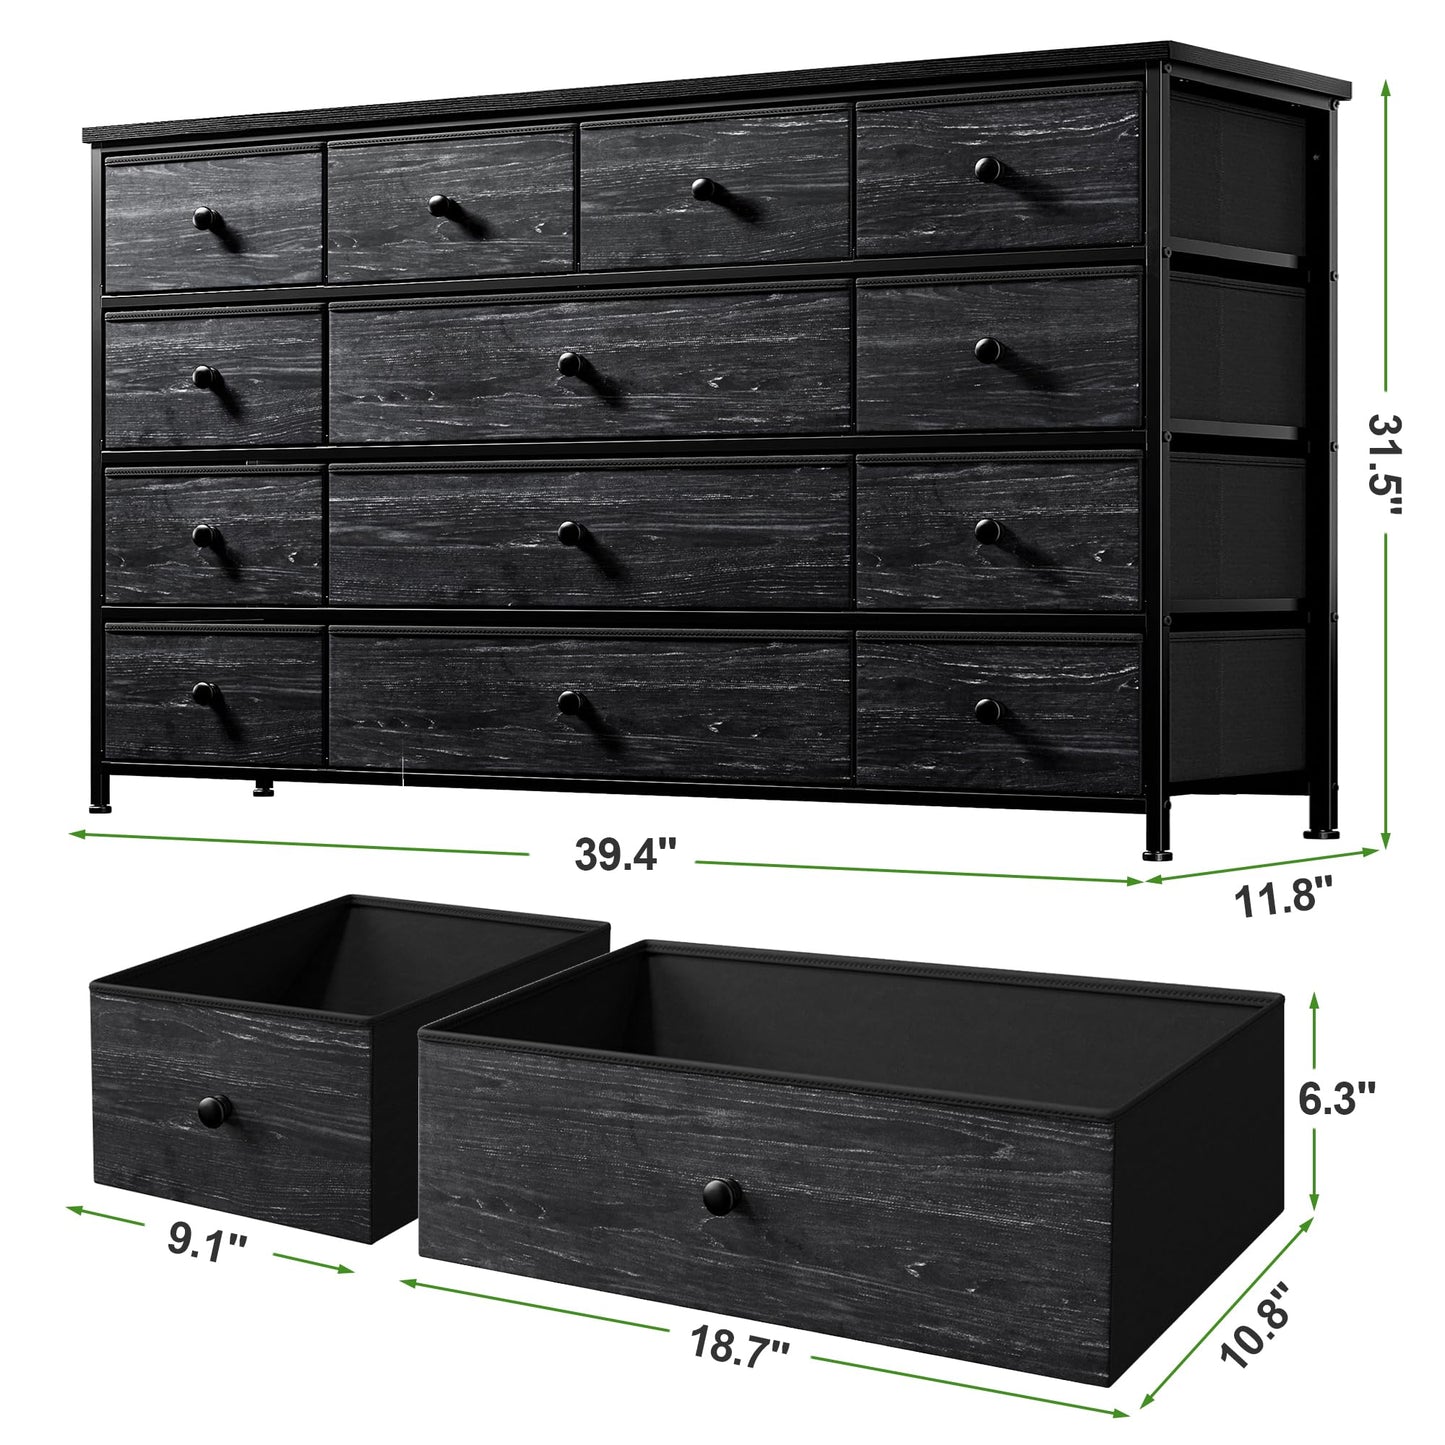 Hana Exports Dresser TV Stand for 55" TV with 13 Drawers, Wide Dresser for Bedroom, Large Dressers & Chest of Drawers for Bedroom Living Room Entryway, Sturdy Metal Frame, 39.4"Wx 31.5"H x 11.8"D,Dark Gray